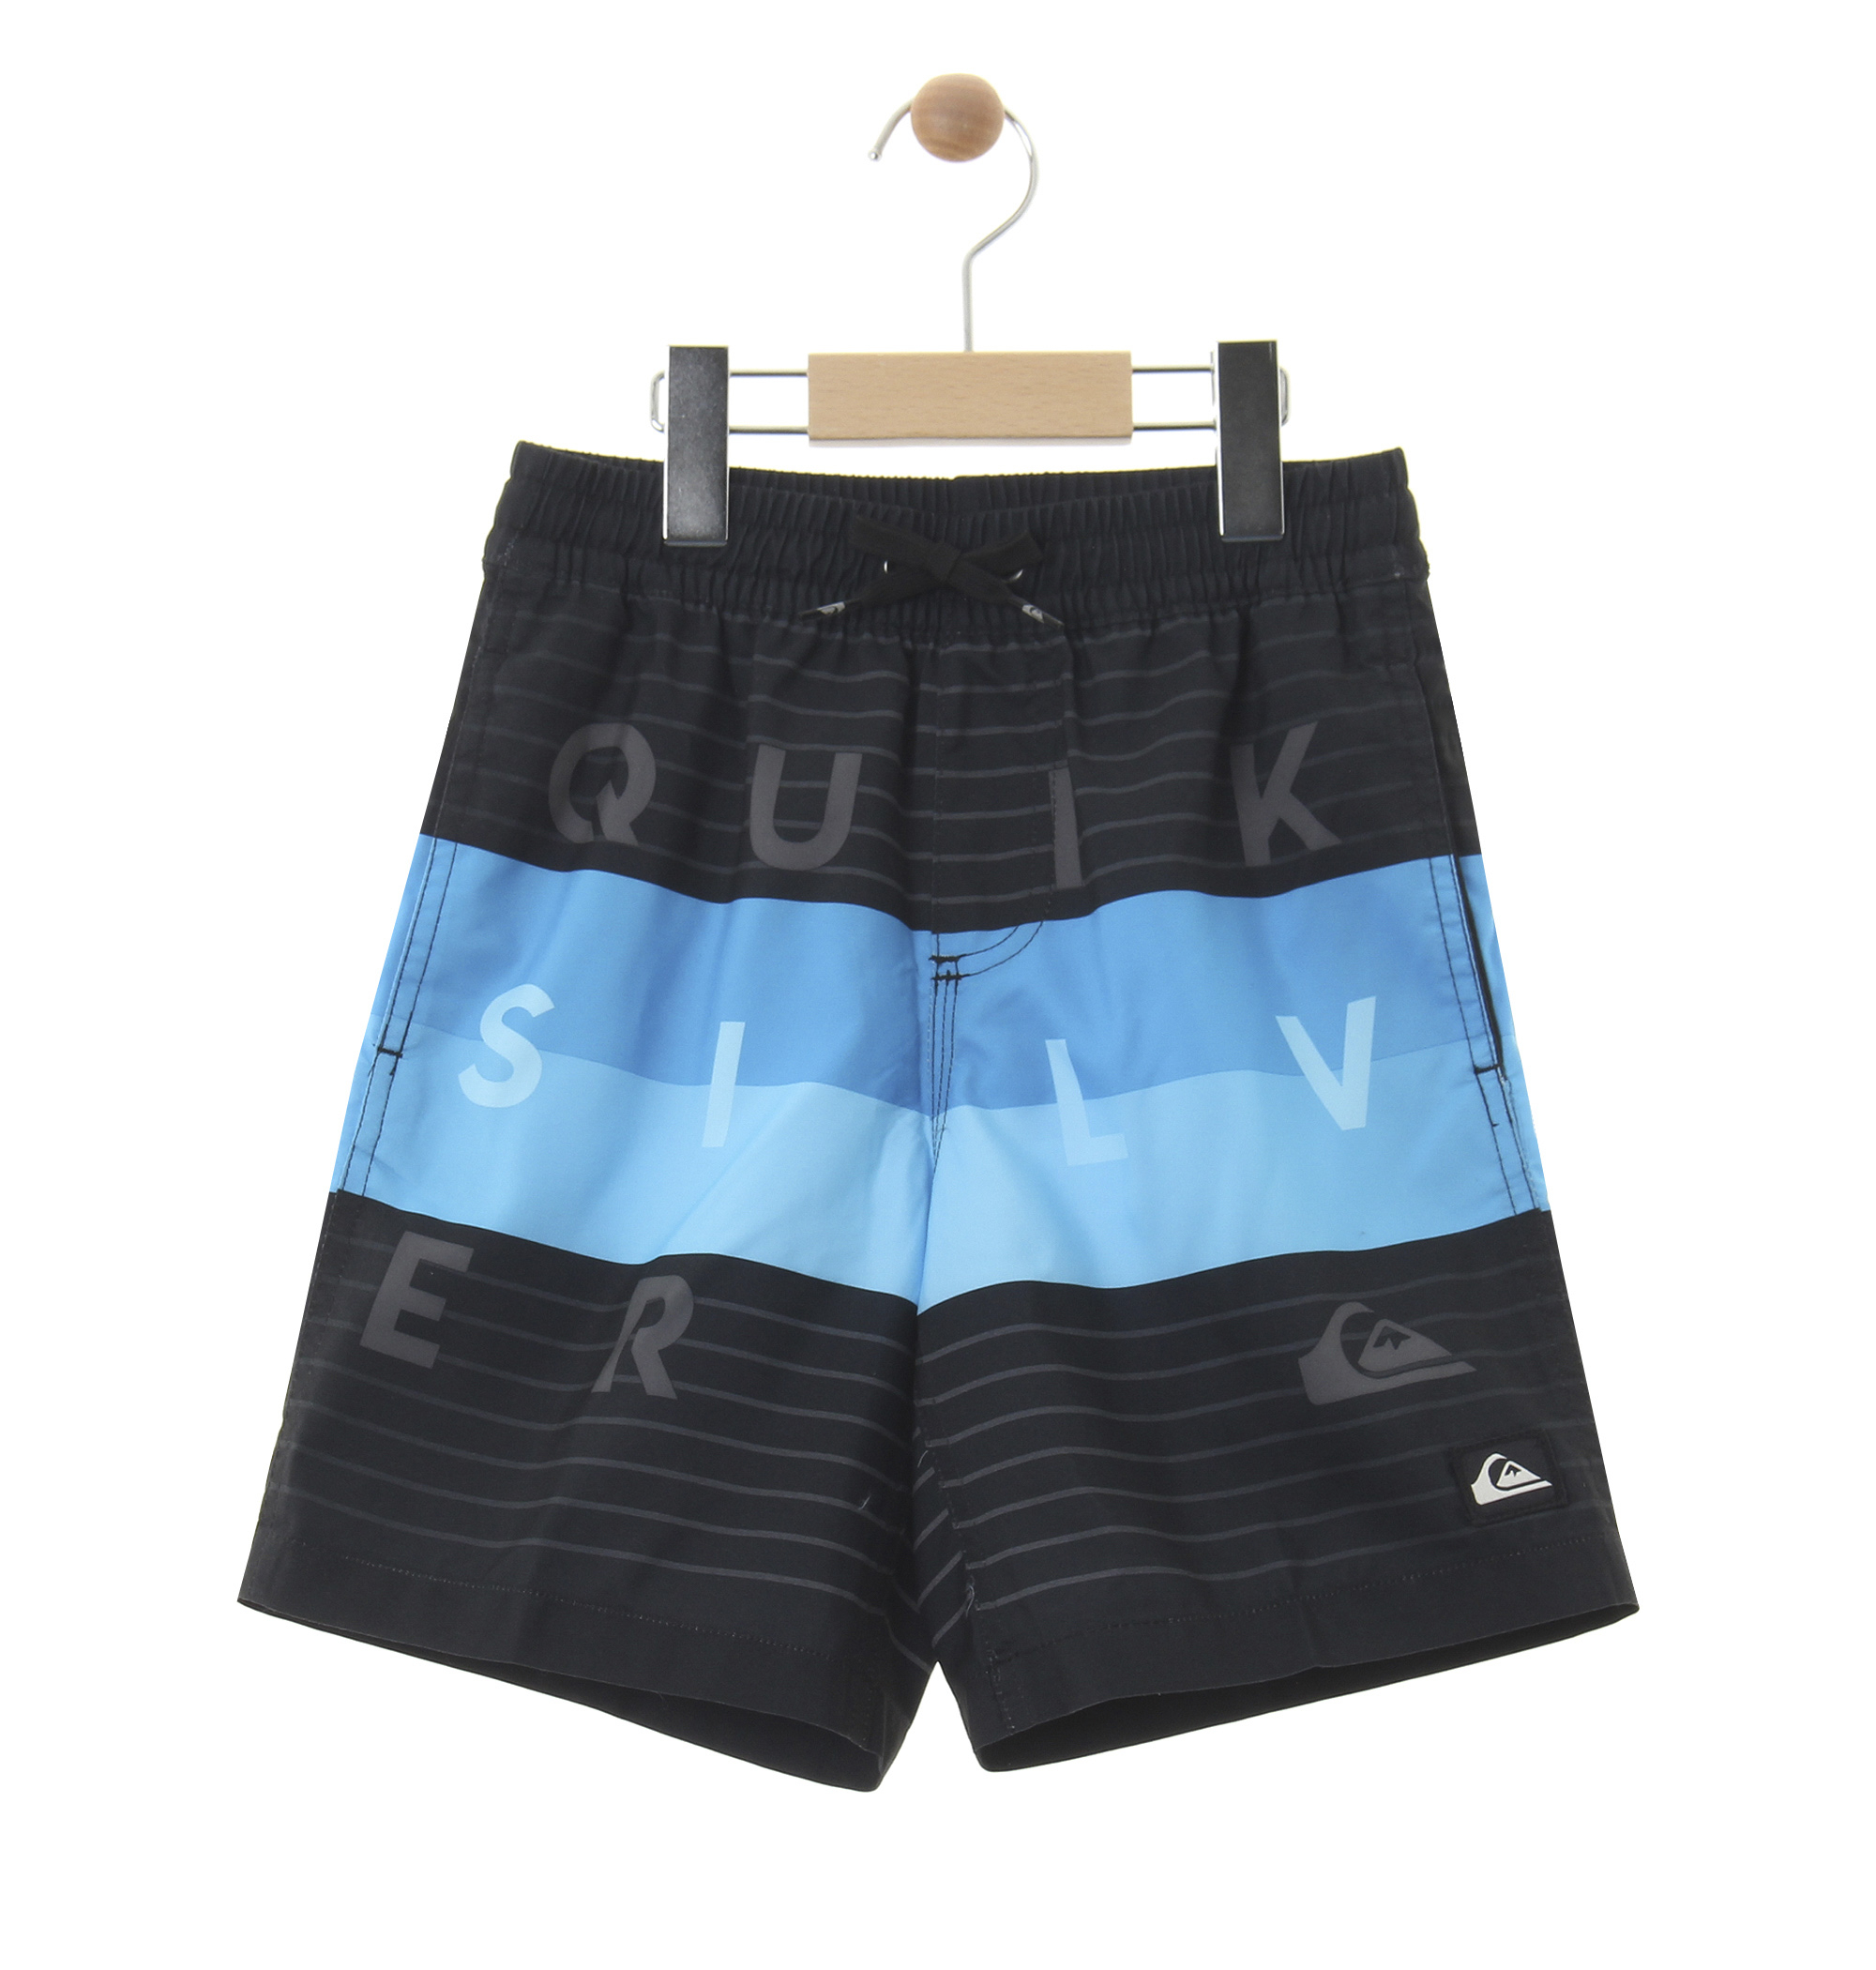 ＜Quiksilver＞ WORD BLOCK VOLLEY YOUTH 17 両サイドとバックにポケットを備えたボードショーツ画像